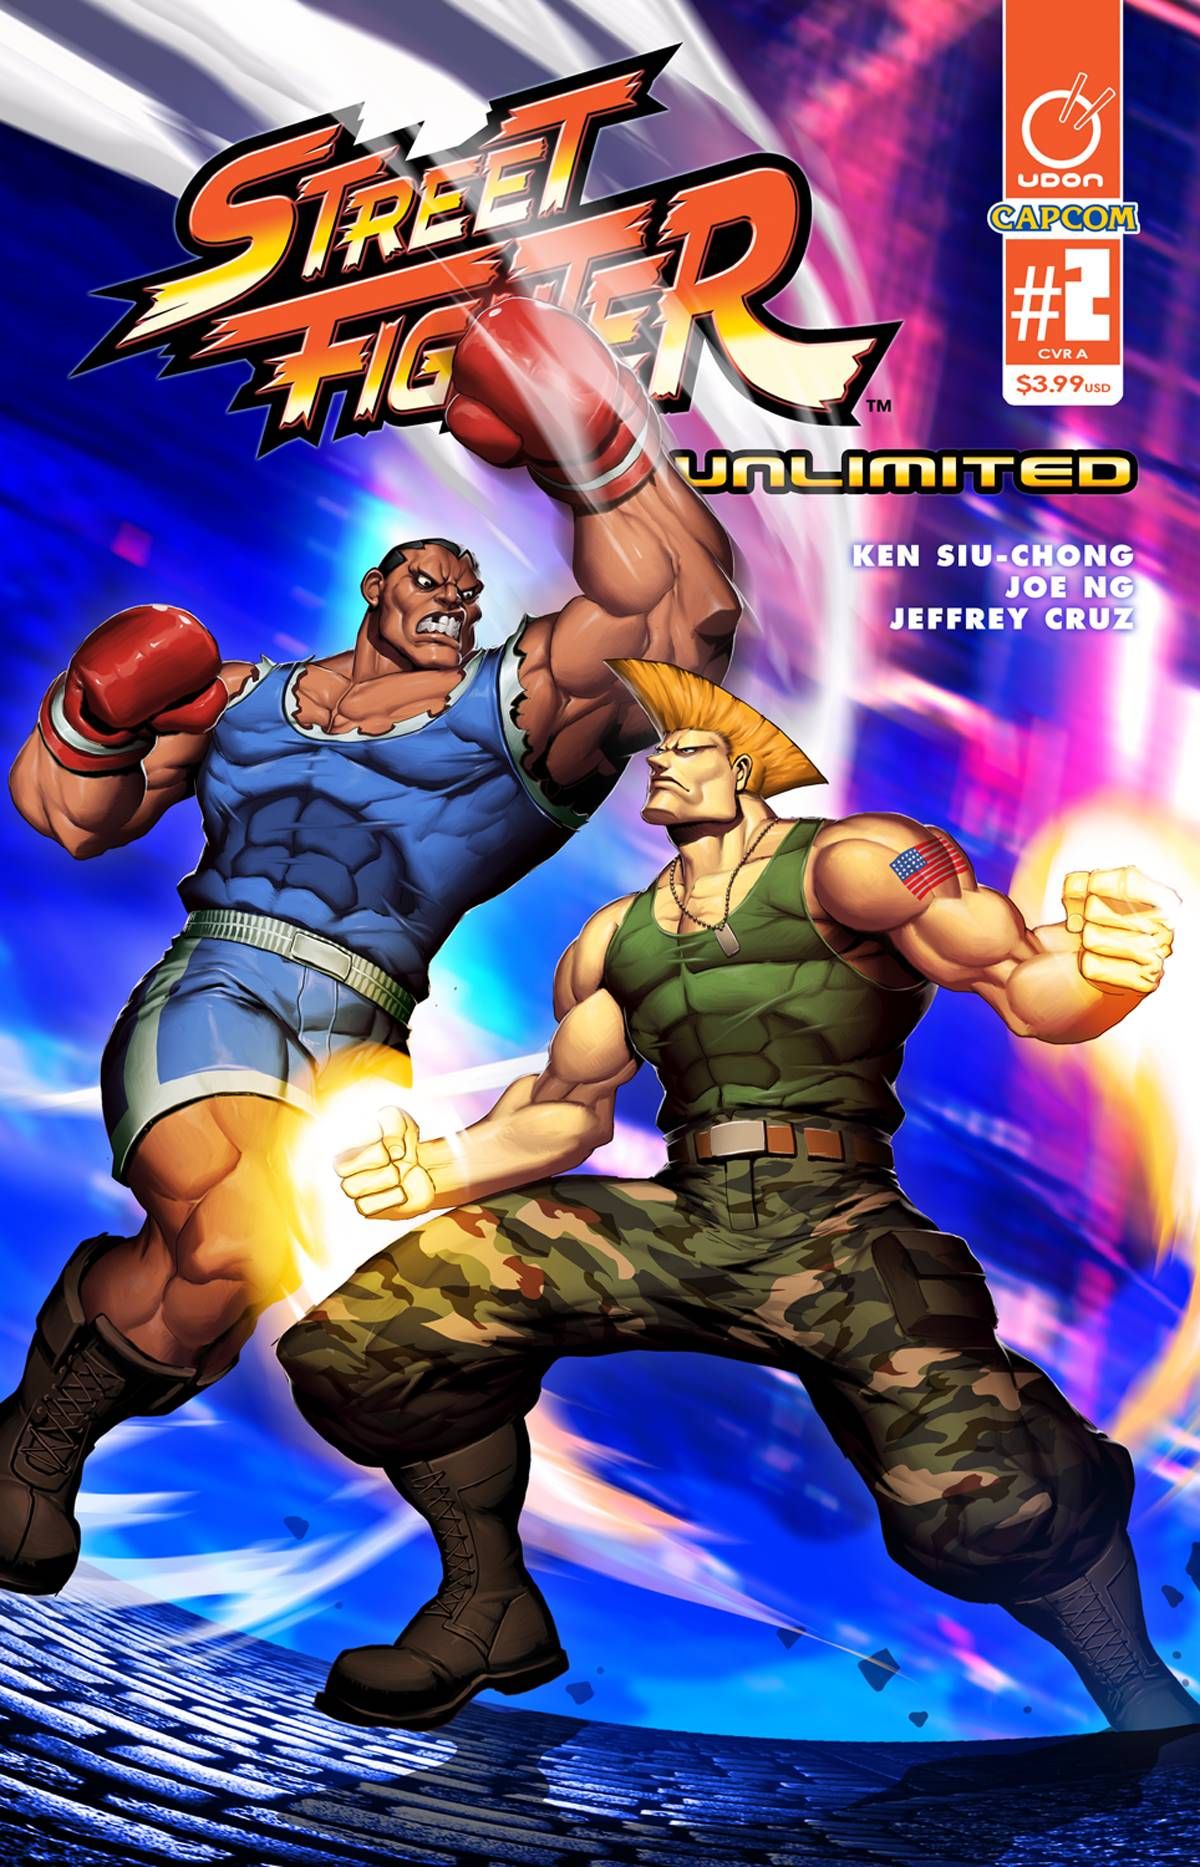 Street Fighter Unlimited #2 Comic